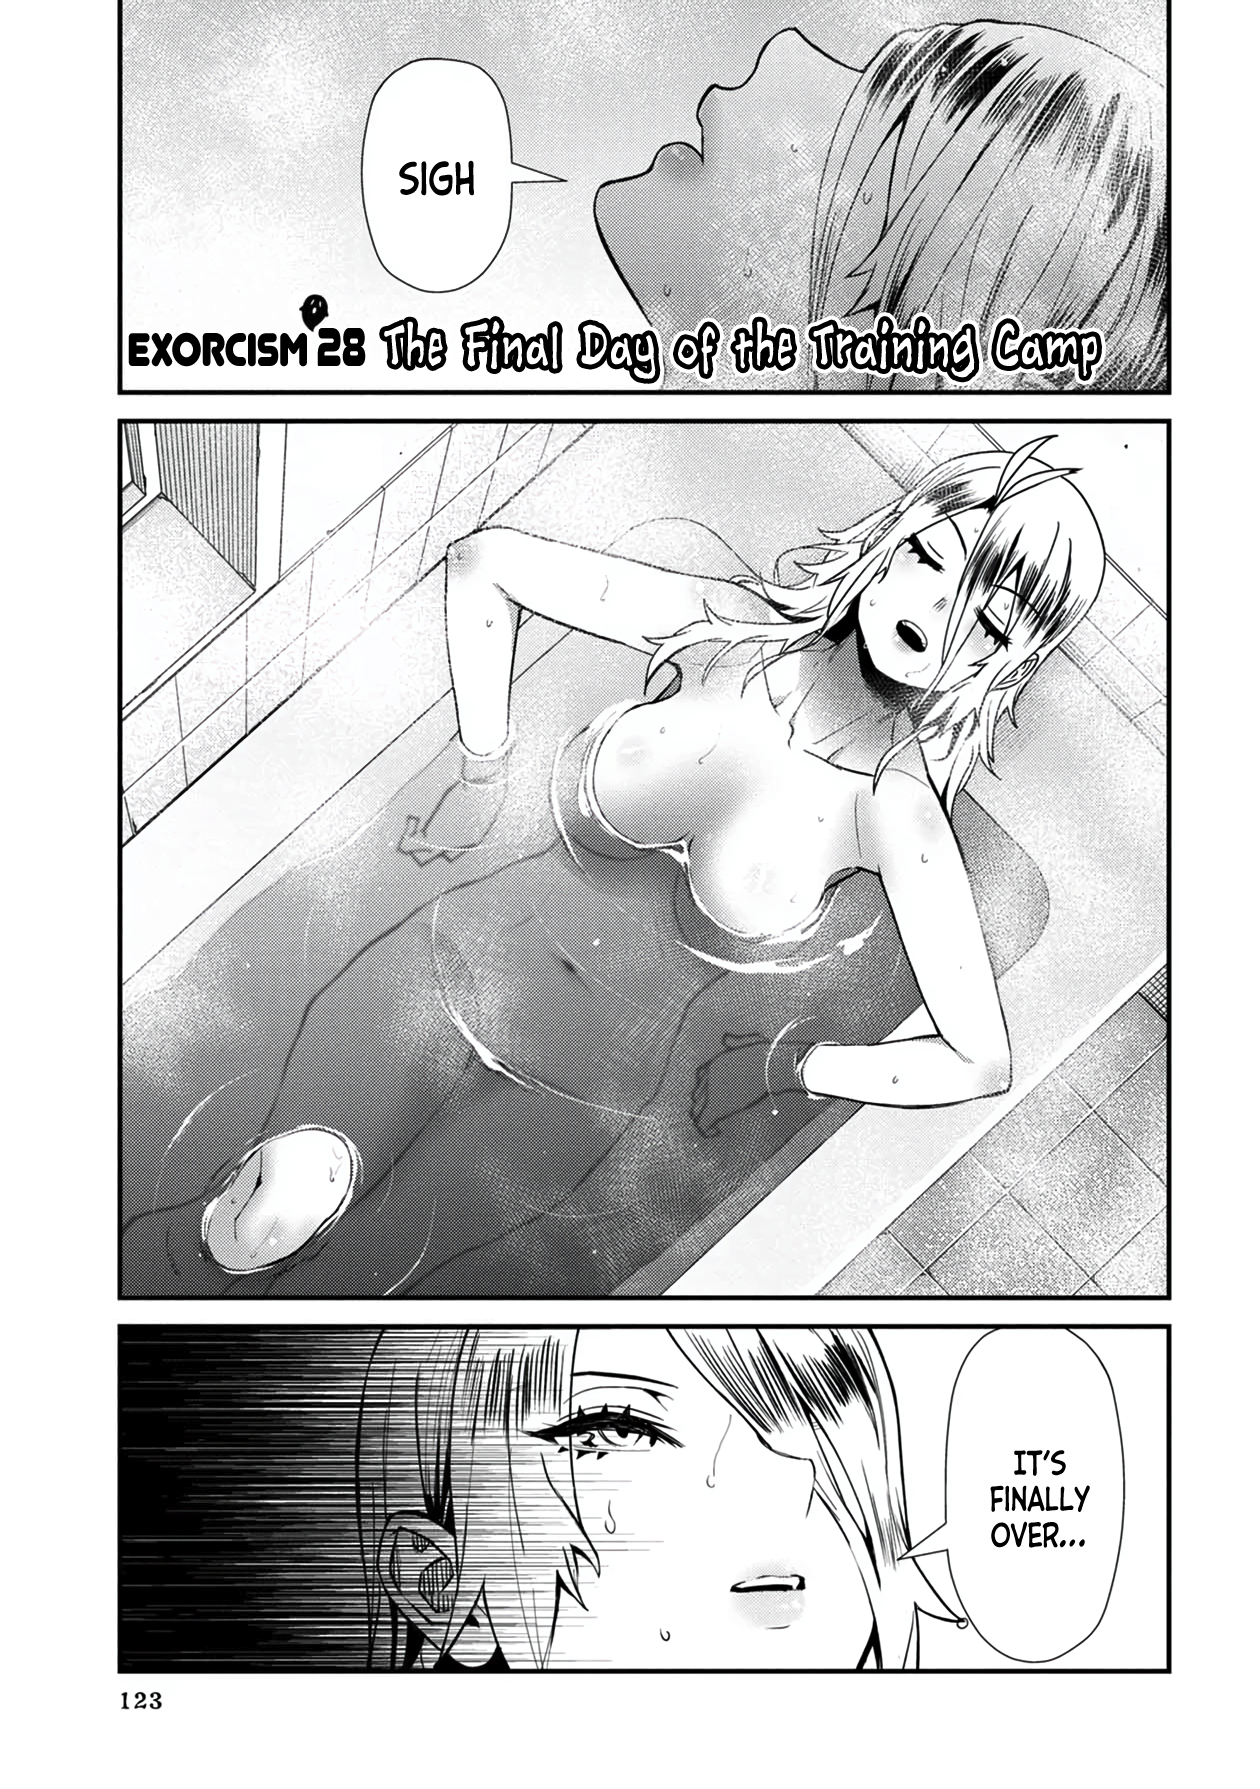 Bad Girl-Exorcist Reina Vol.3 Chapter 28: Exorcism #28 - The Final Day Of The Training Camp - Picture 1